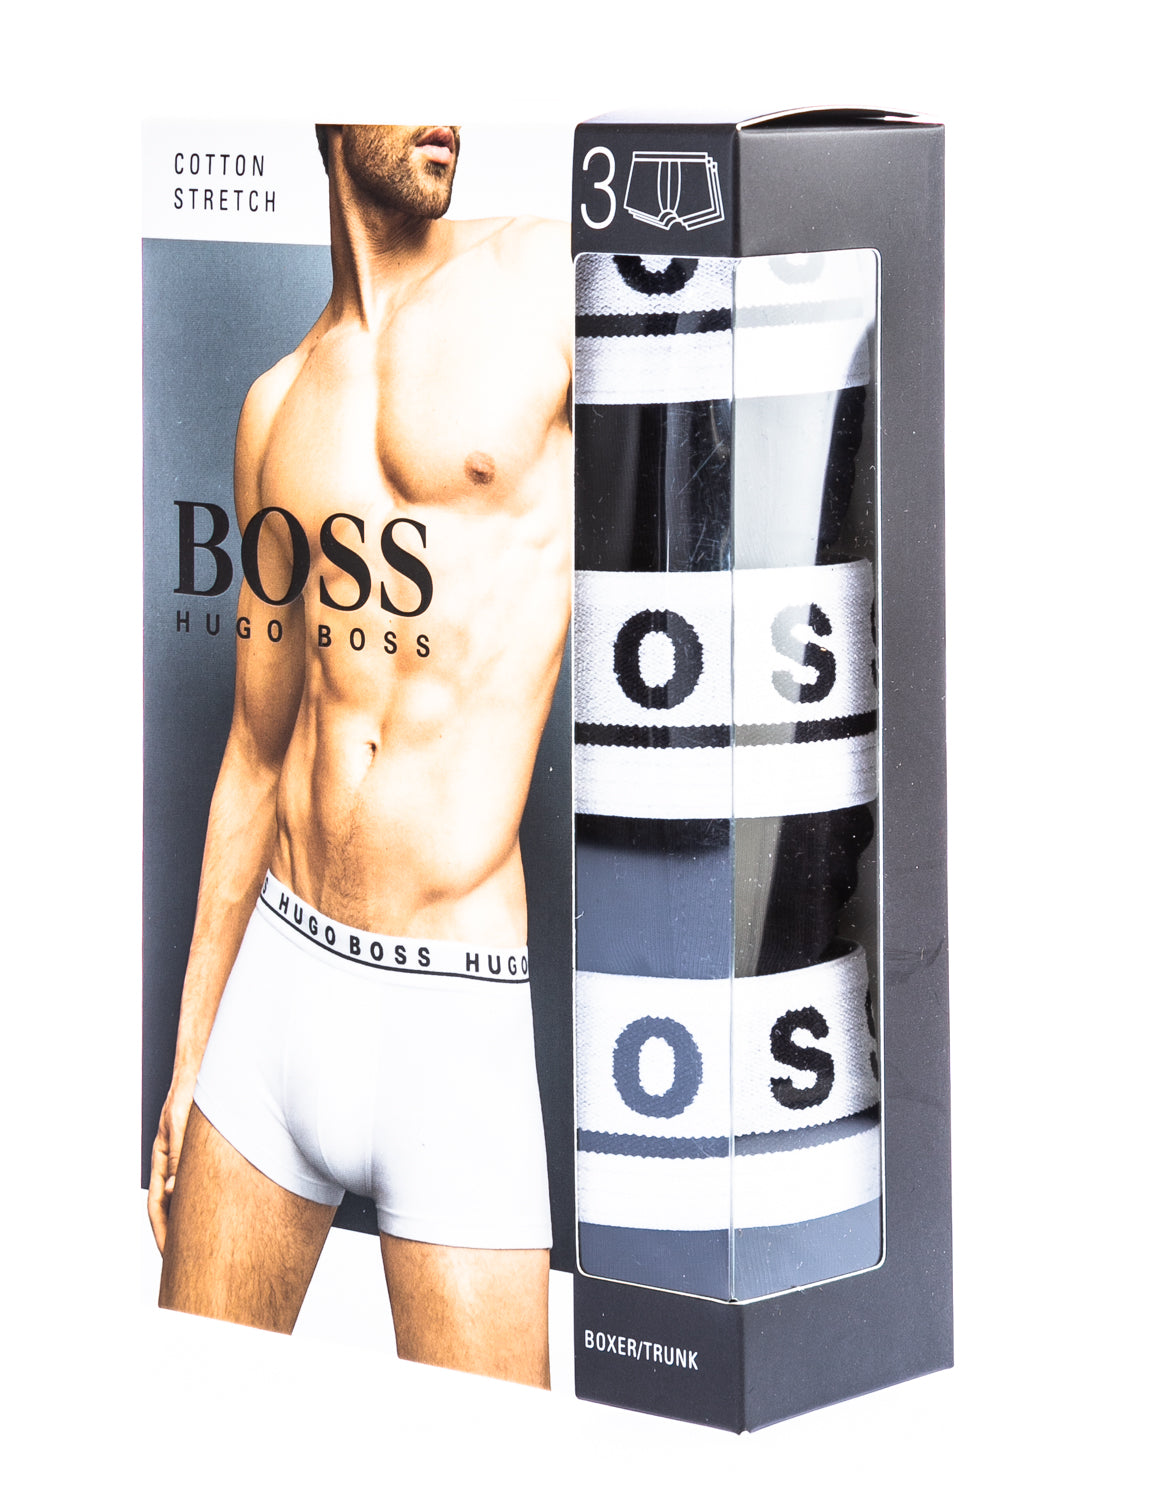 BOSS 3 Pack Trunk Underwear in Black with White Waistband